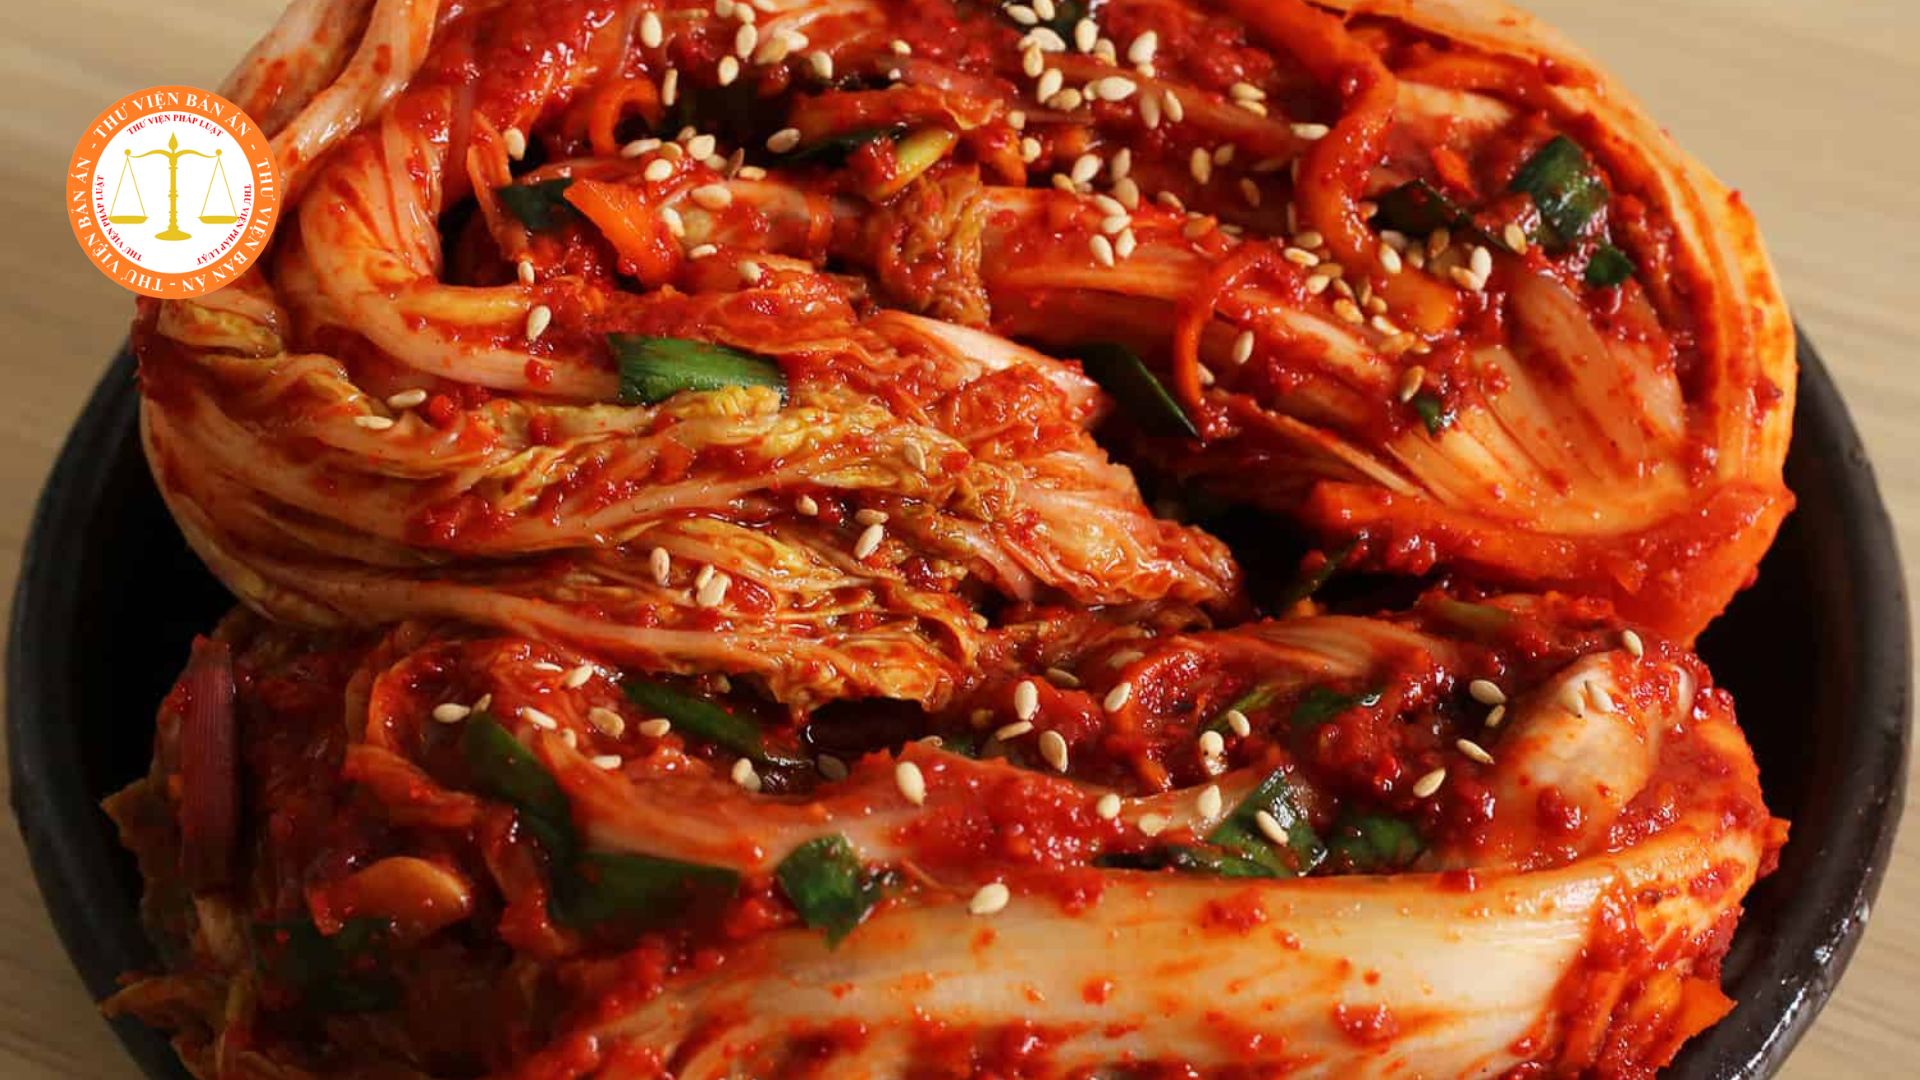 Quality standards of kimchi products according to TCVN 13120:2020 in Vietnam